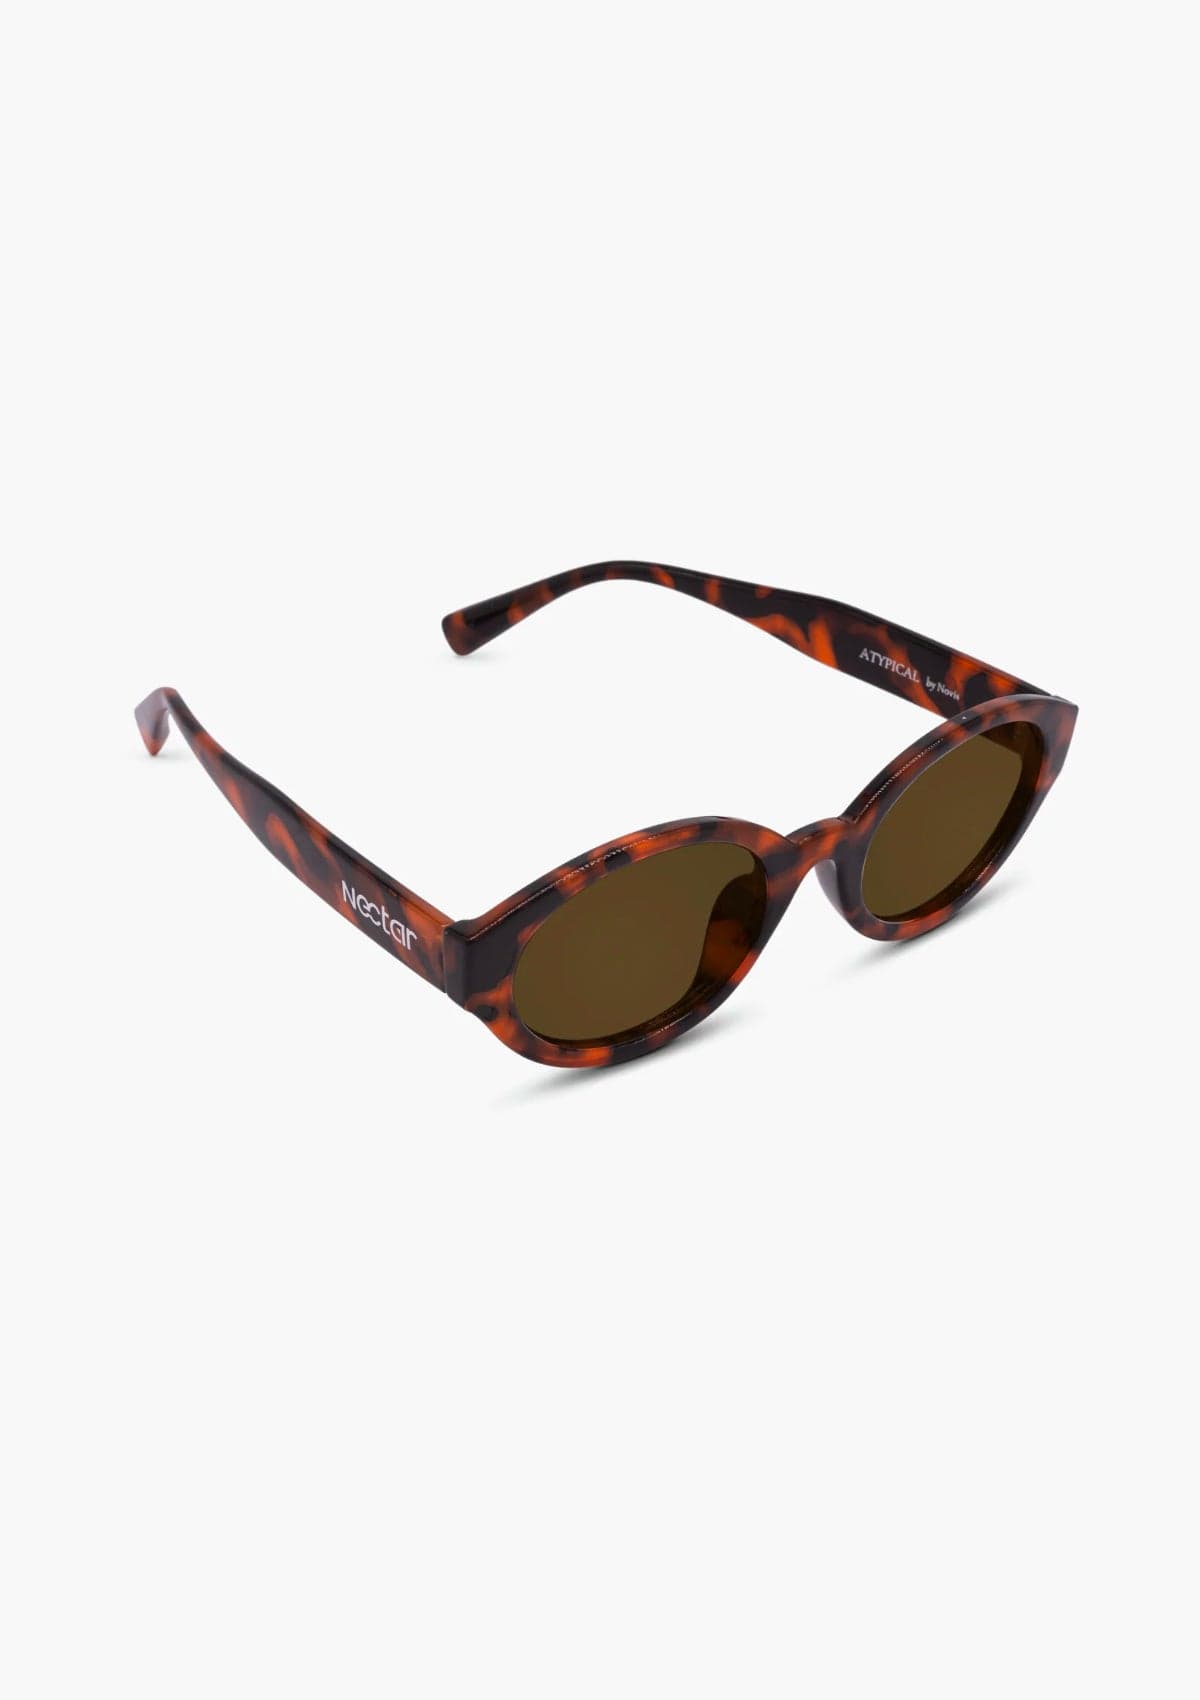 Nectar Atypical Amber Lens - Brown Tortoise Frame